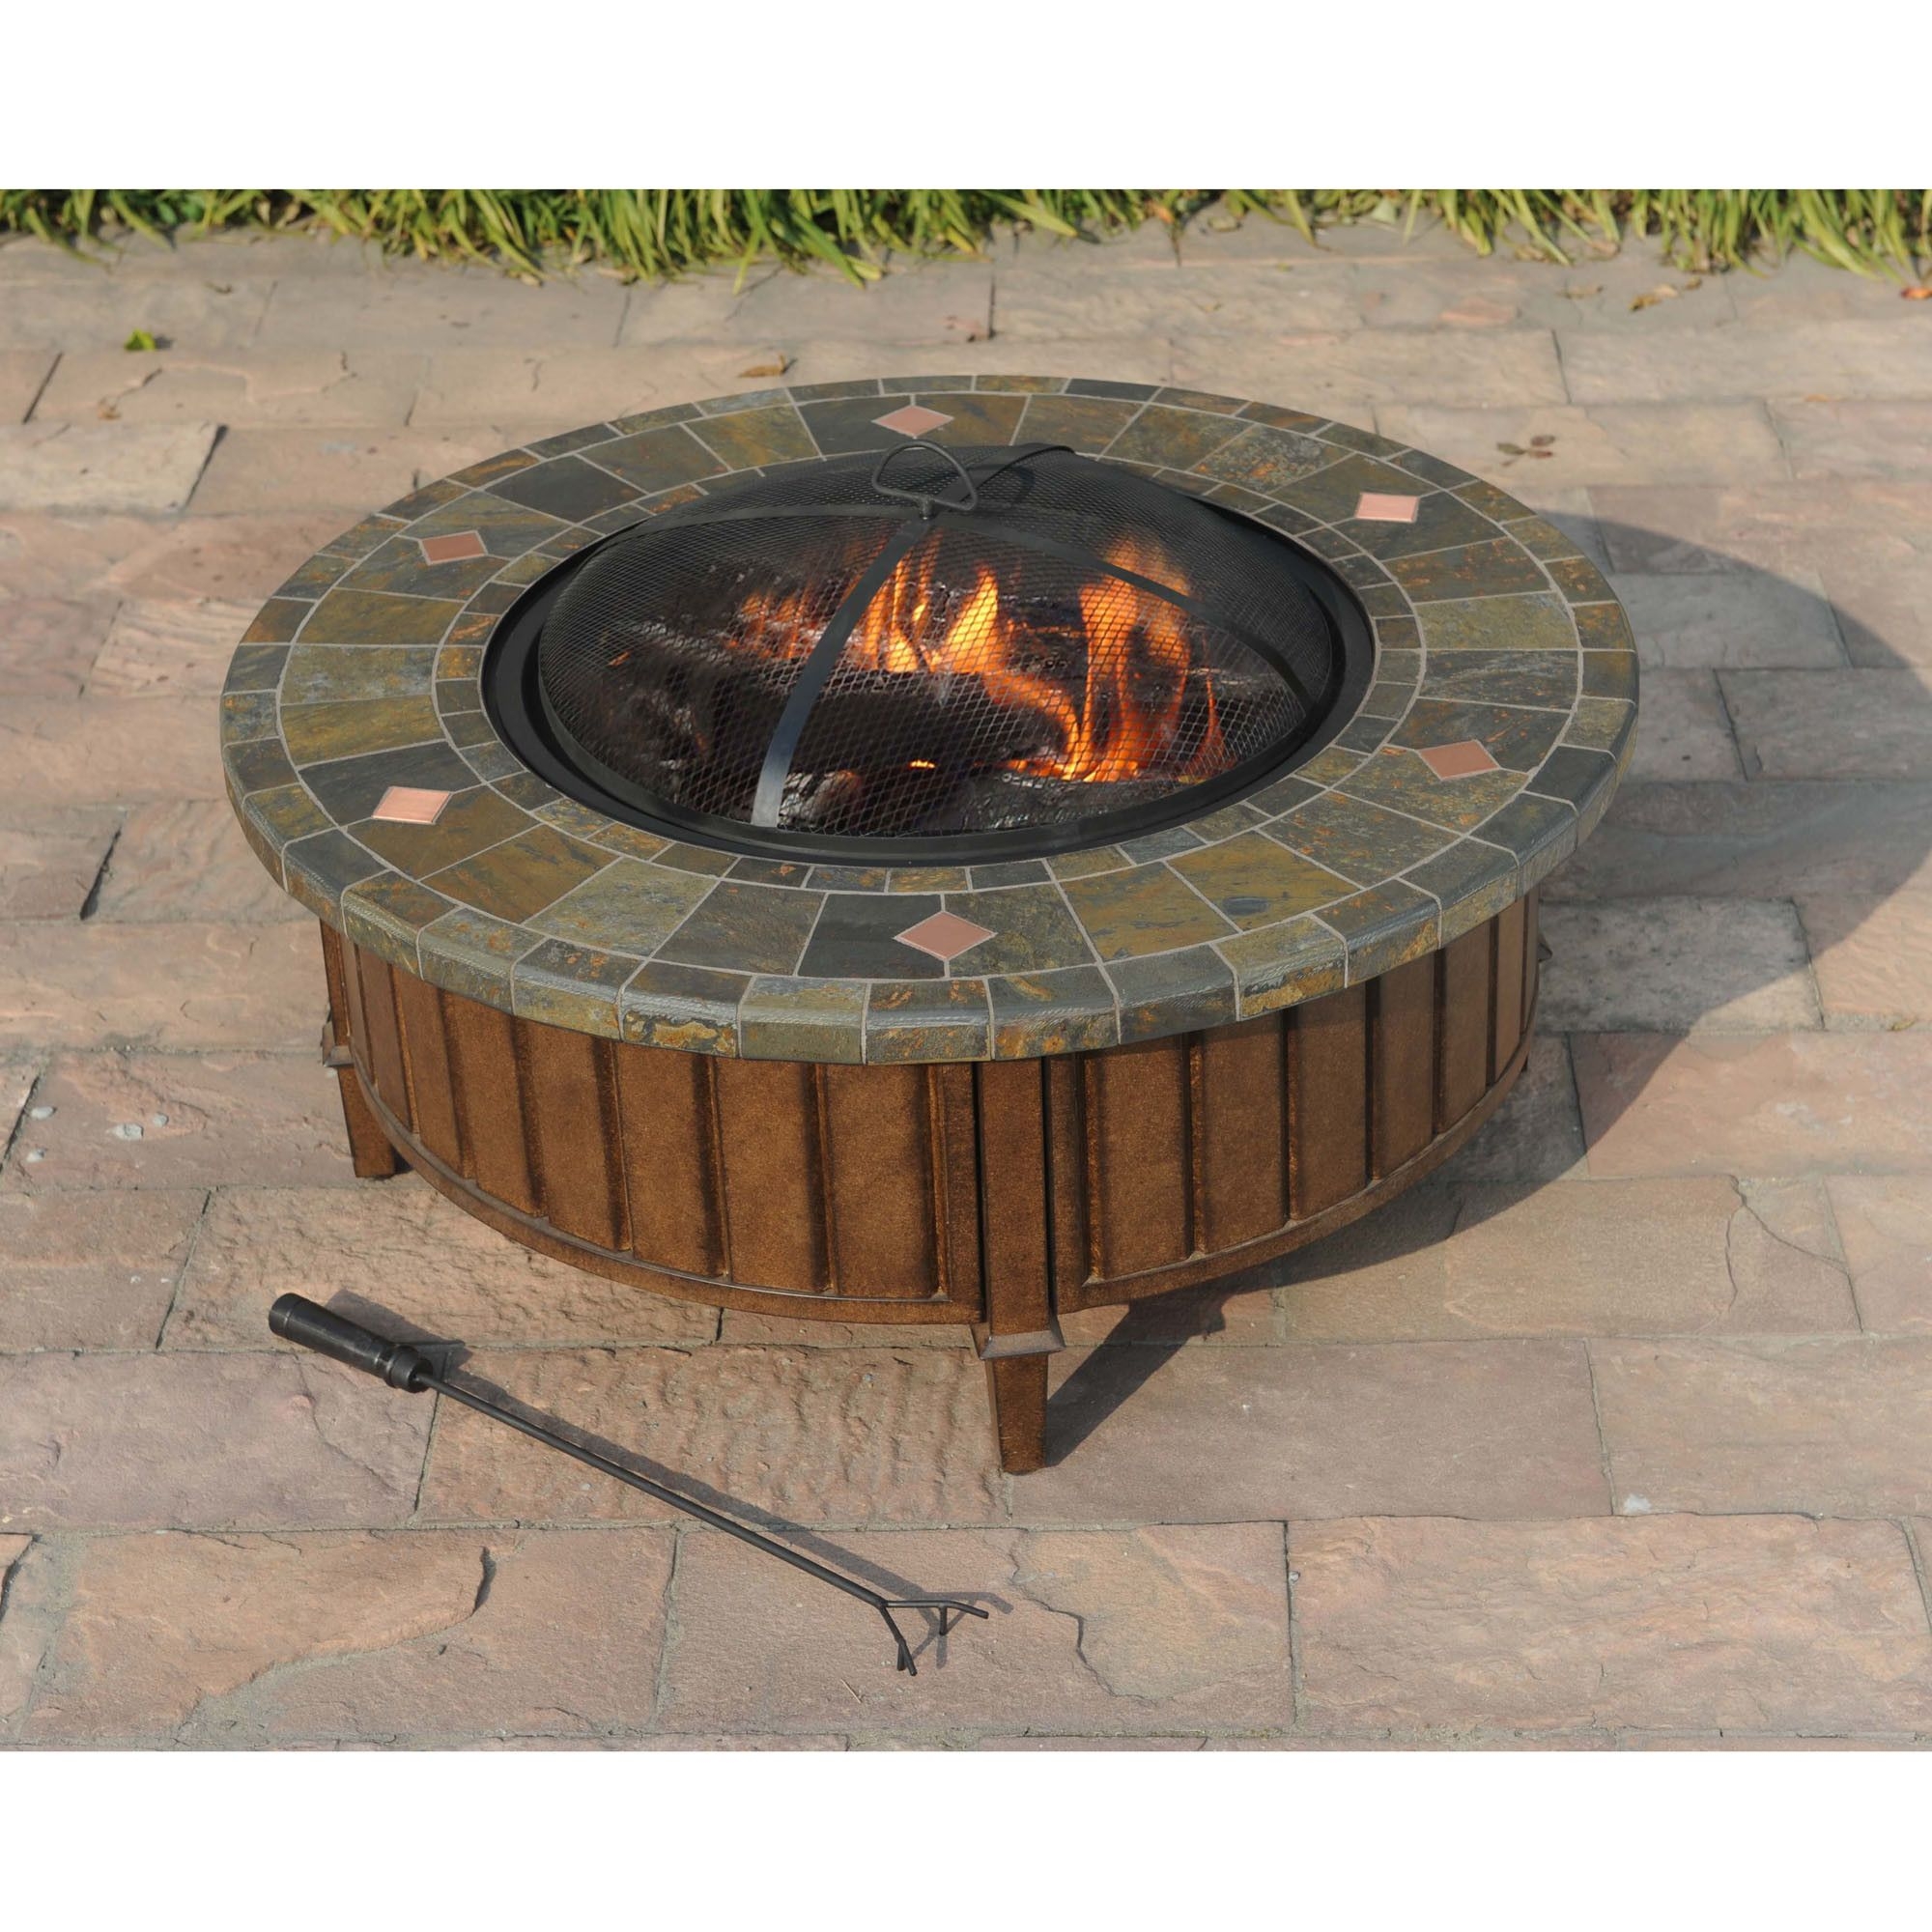 Wood Burning Fire Pit Table Visualhunt, Round Wood Fire Pit Table